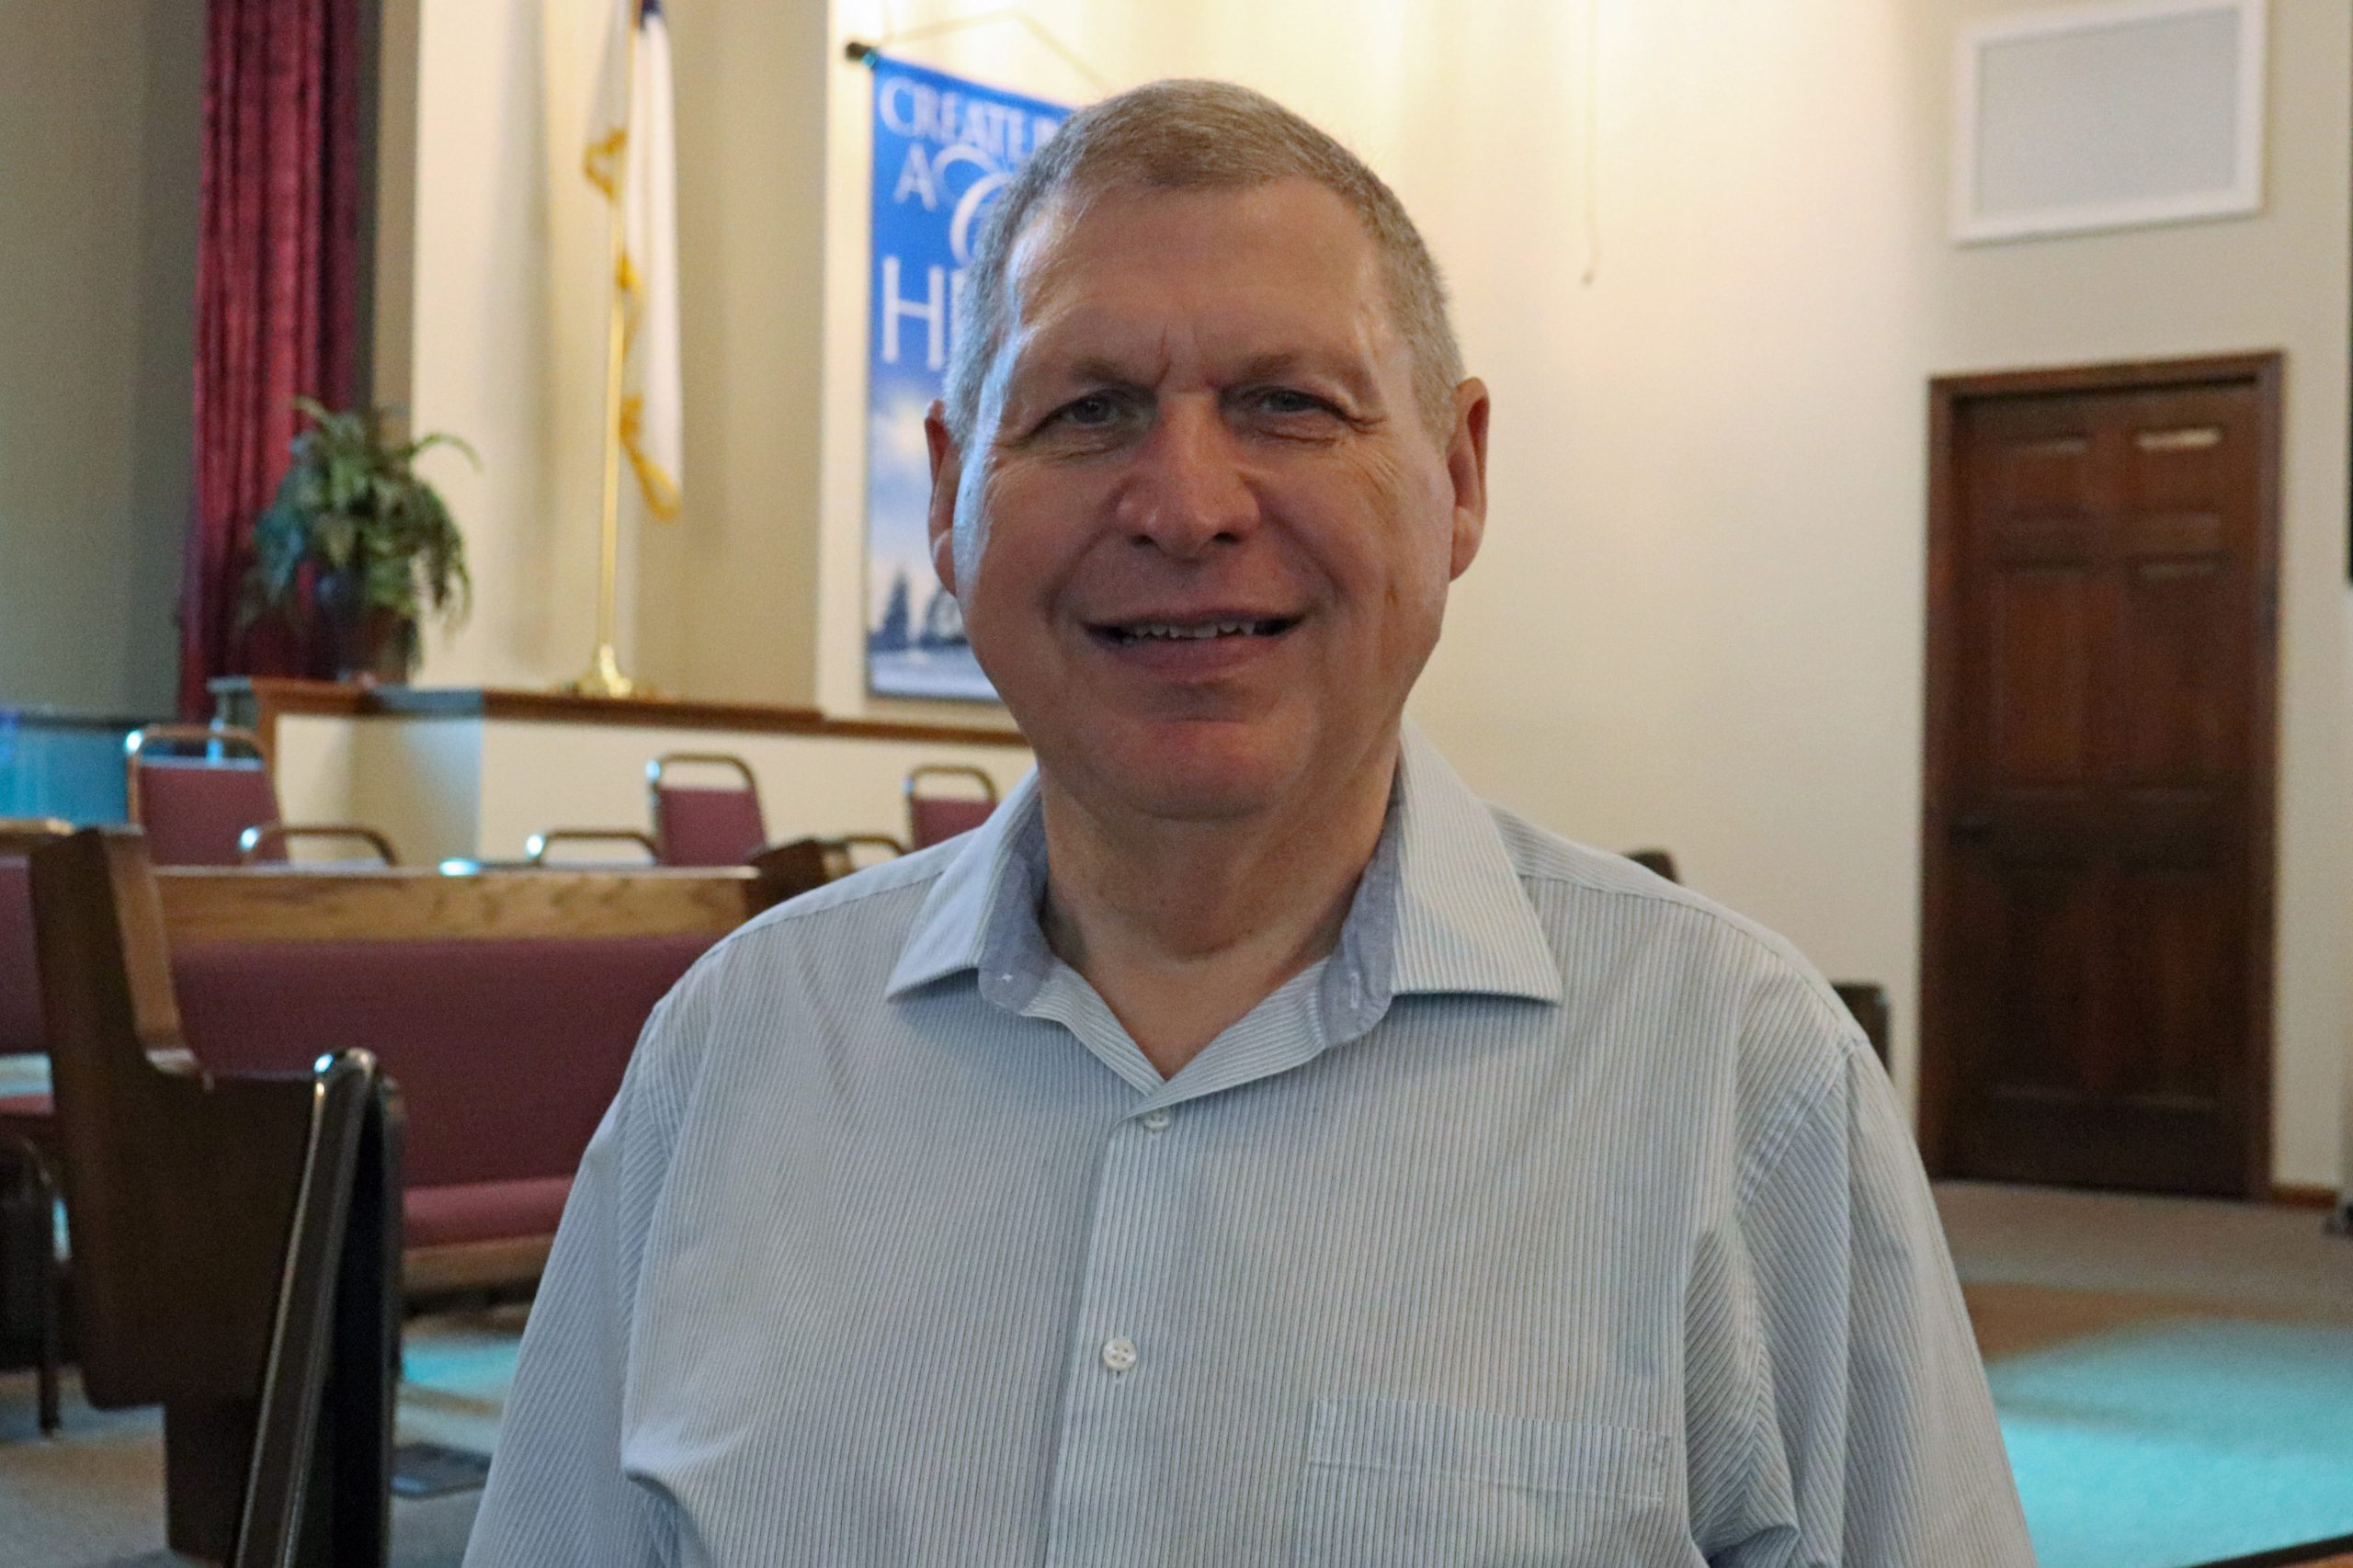 Jim Chase, Head of Deacons